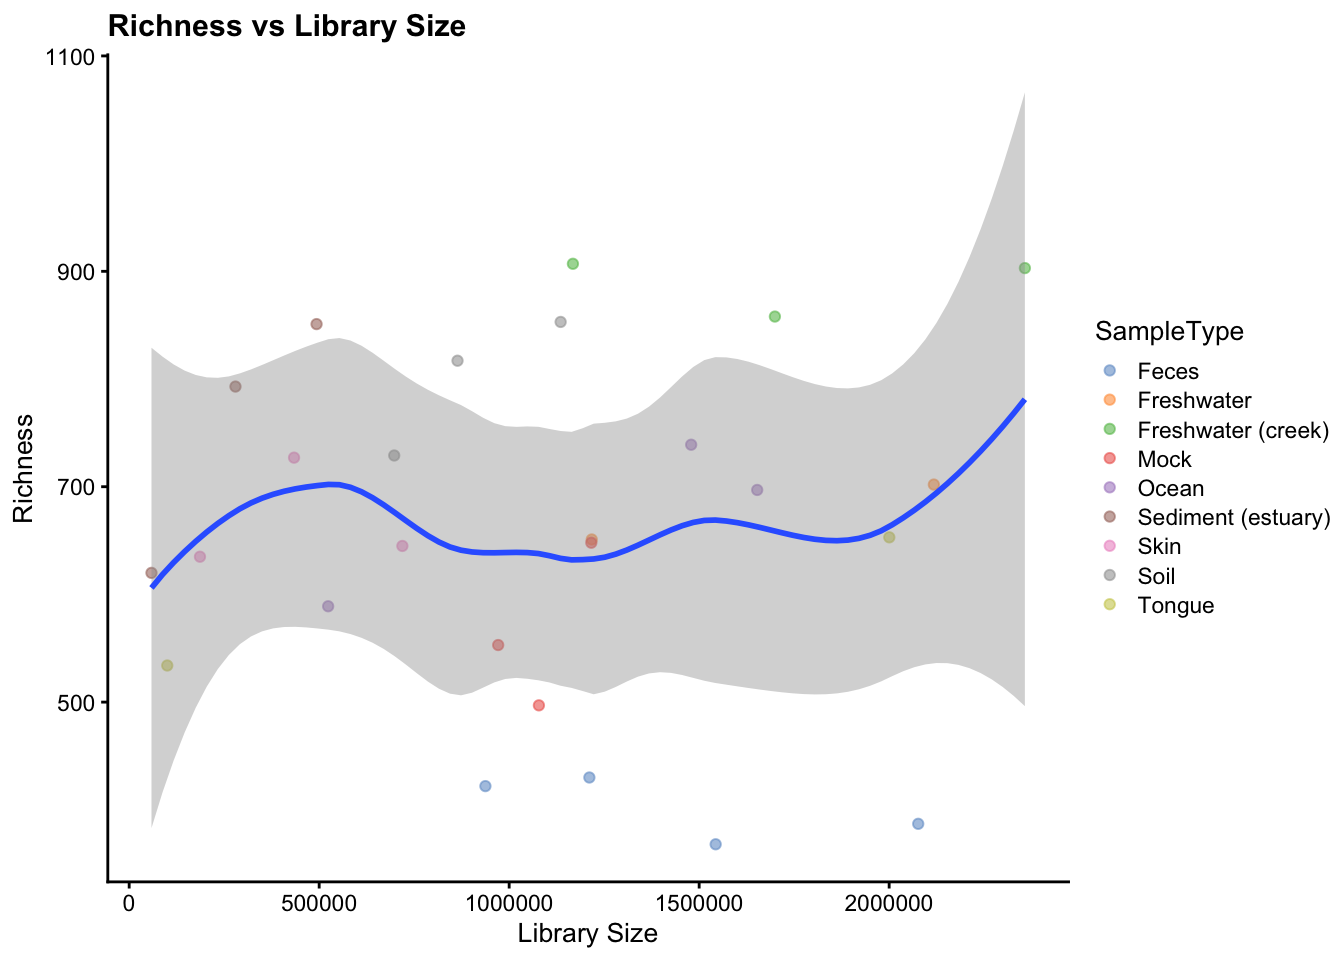 Relationship between richness and library size coloured by sample type.